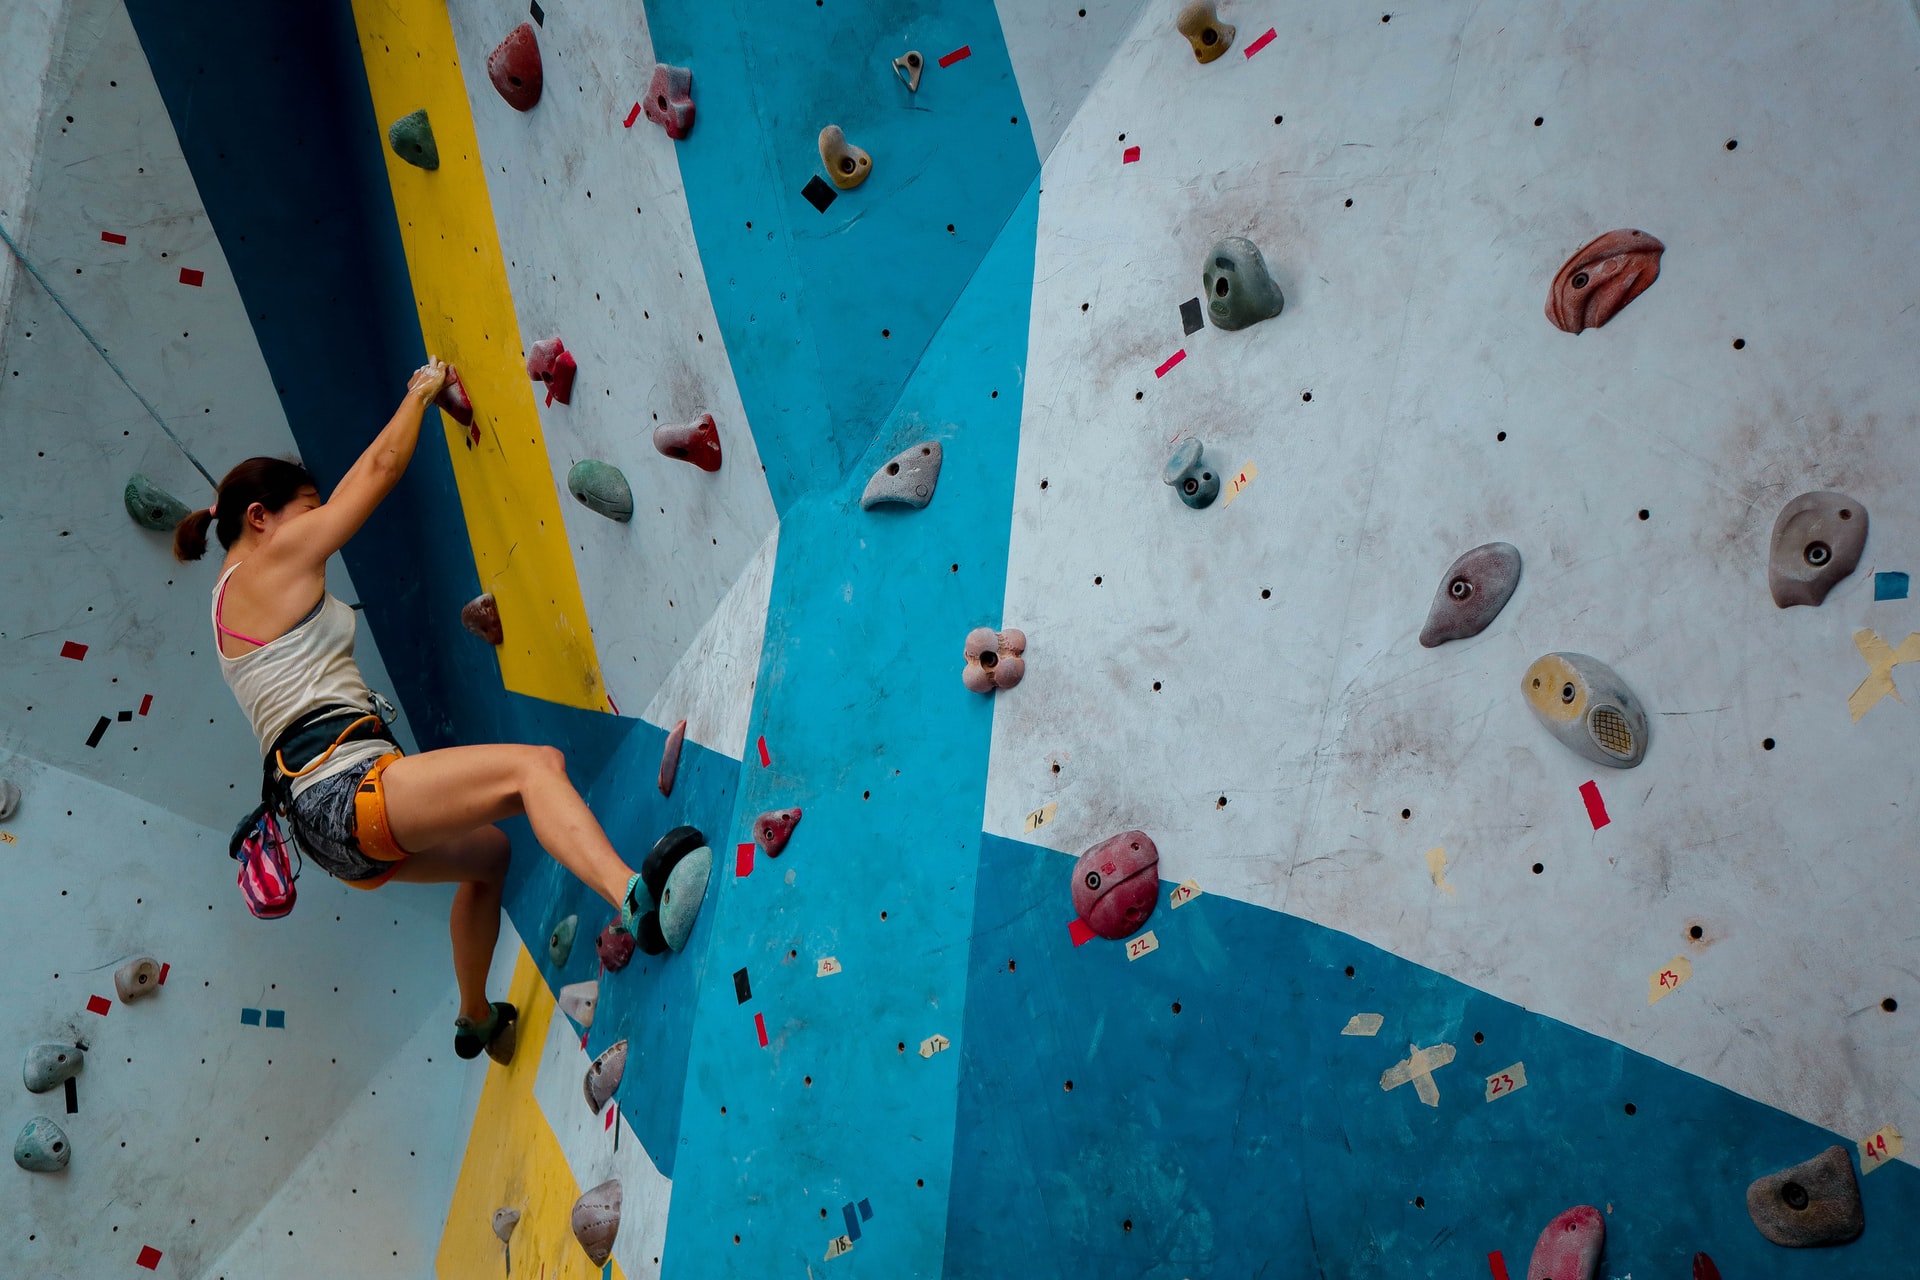 How do climbing gyms set up and grade their routes?